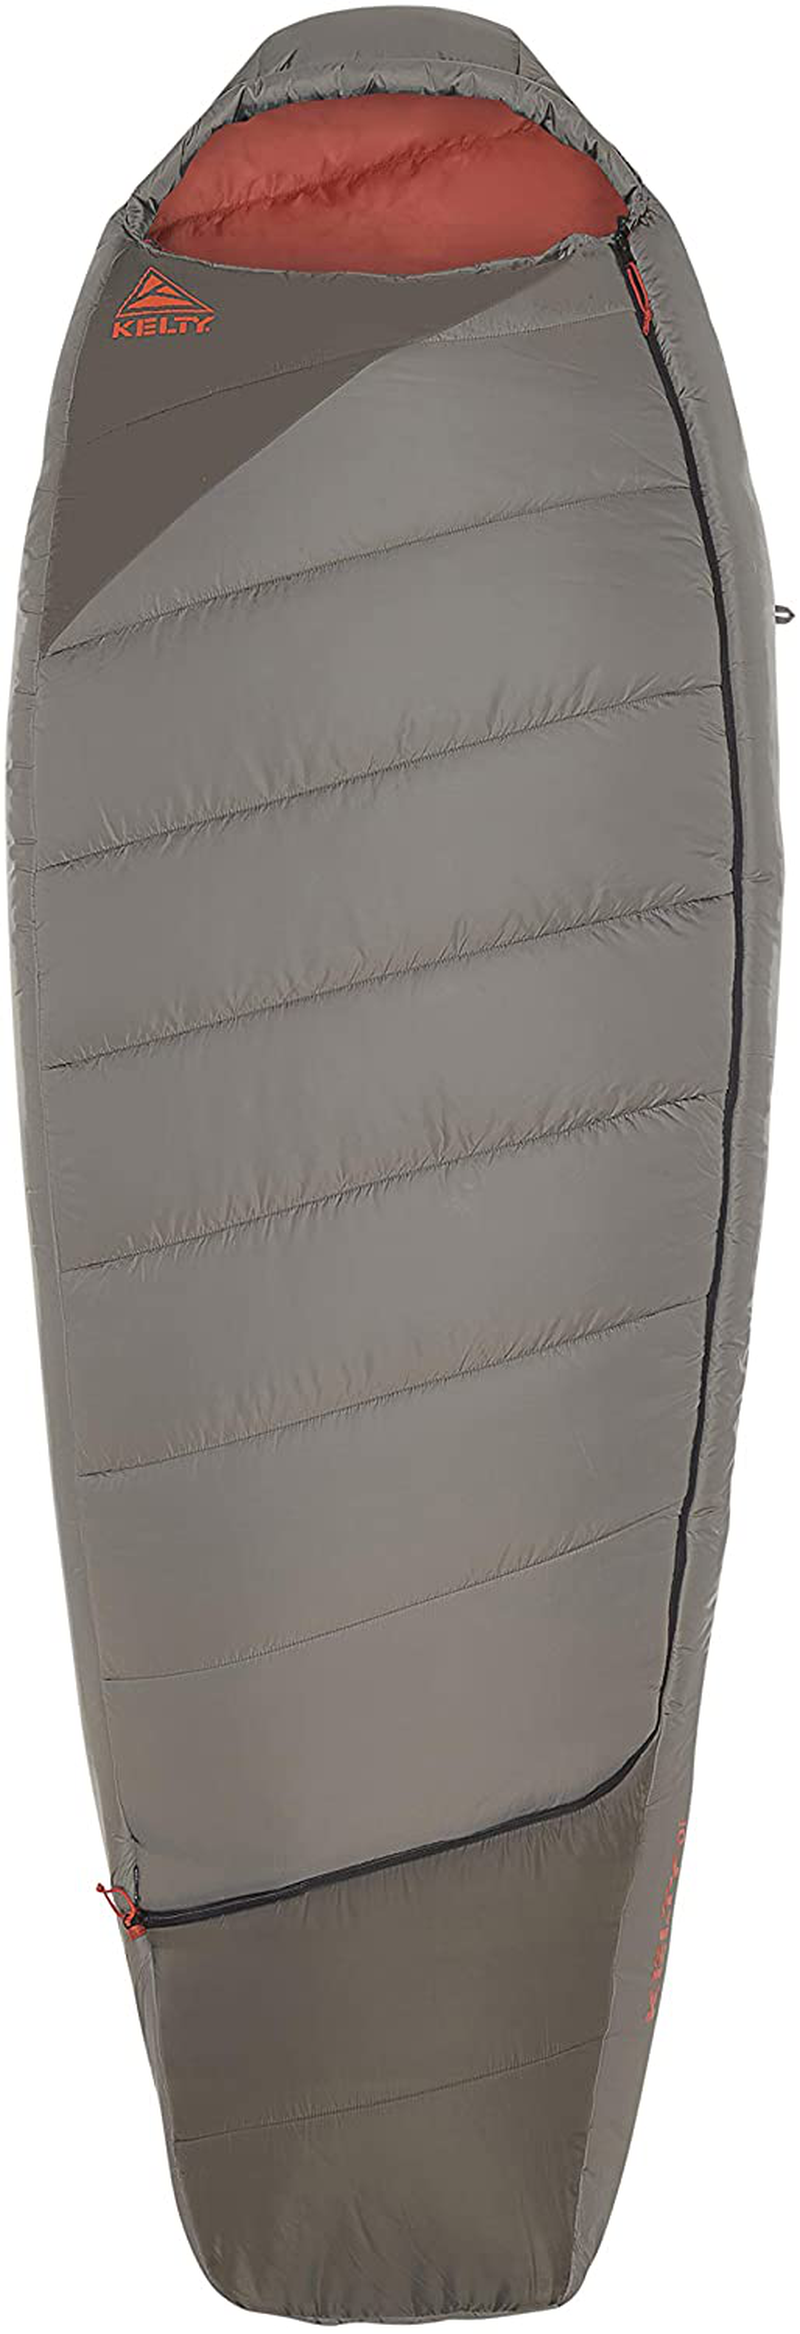 Kelty Tuck Synthetic Mummy Sleeping Bag (2020 Update) Sporting Goods > Outdoor Recreation > Camping & Hiking > Sleeping BagsSporting Goods > Outdoor Recreation > Camping & Hiking > Sleeping Bags Kelty 0 Degree - Regular  